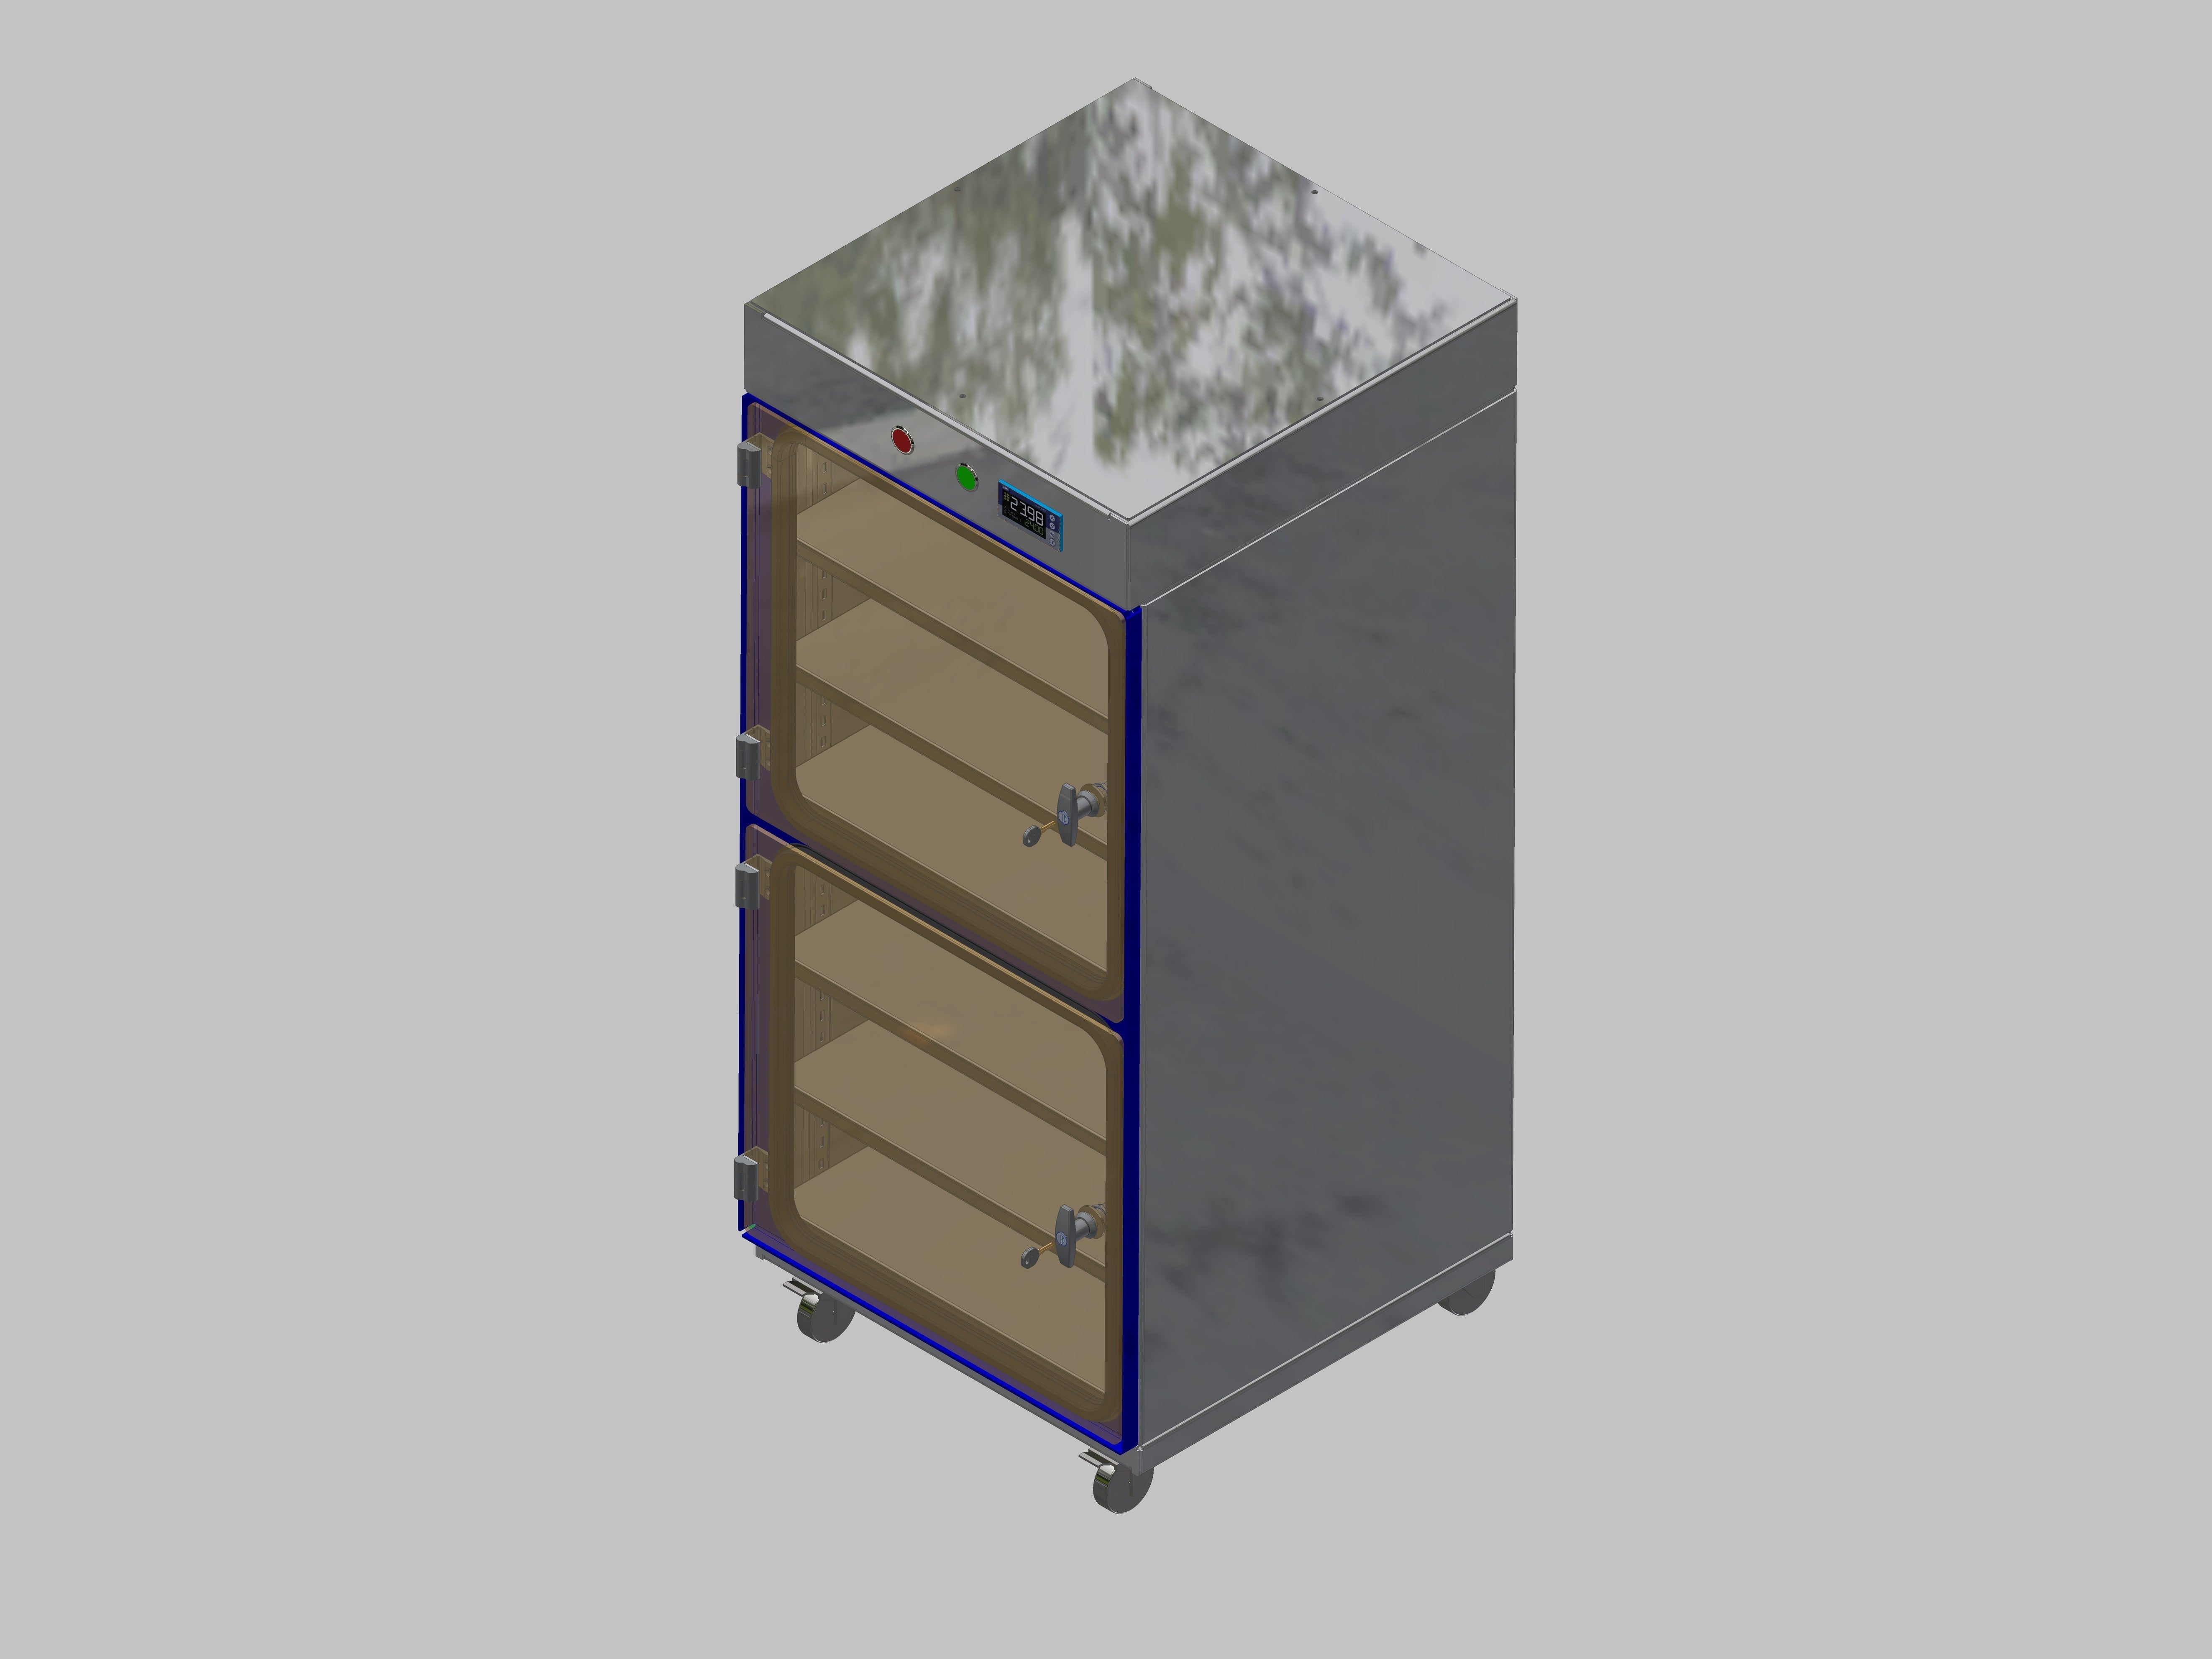 Dry storage cabinet-ITN-600-1 with 3 shelves per compartment and base design with wheels